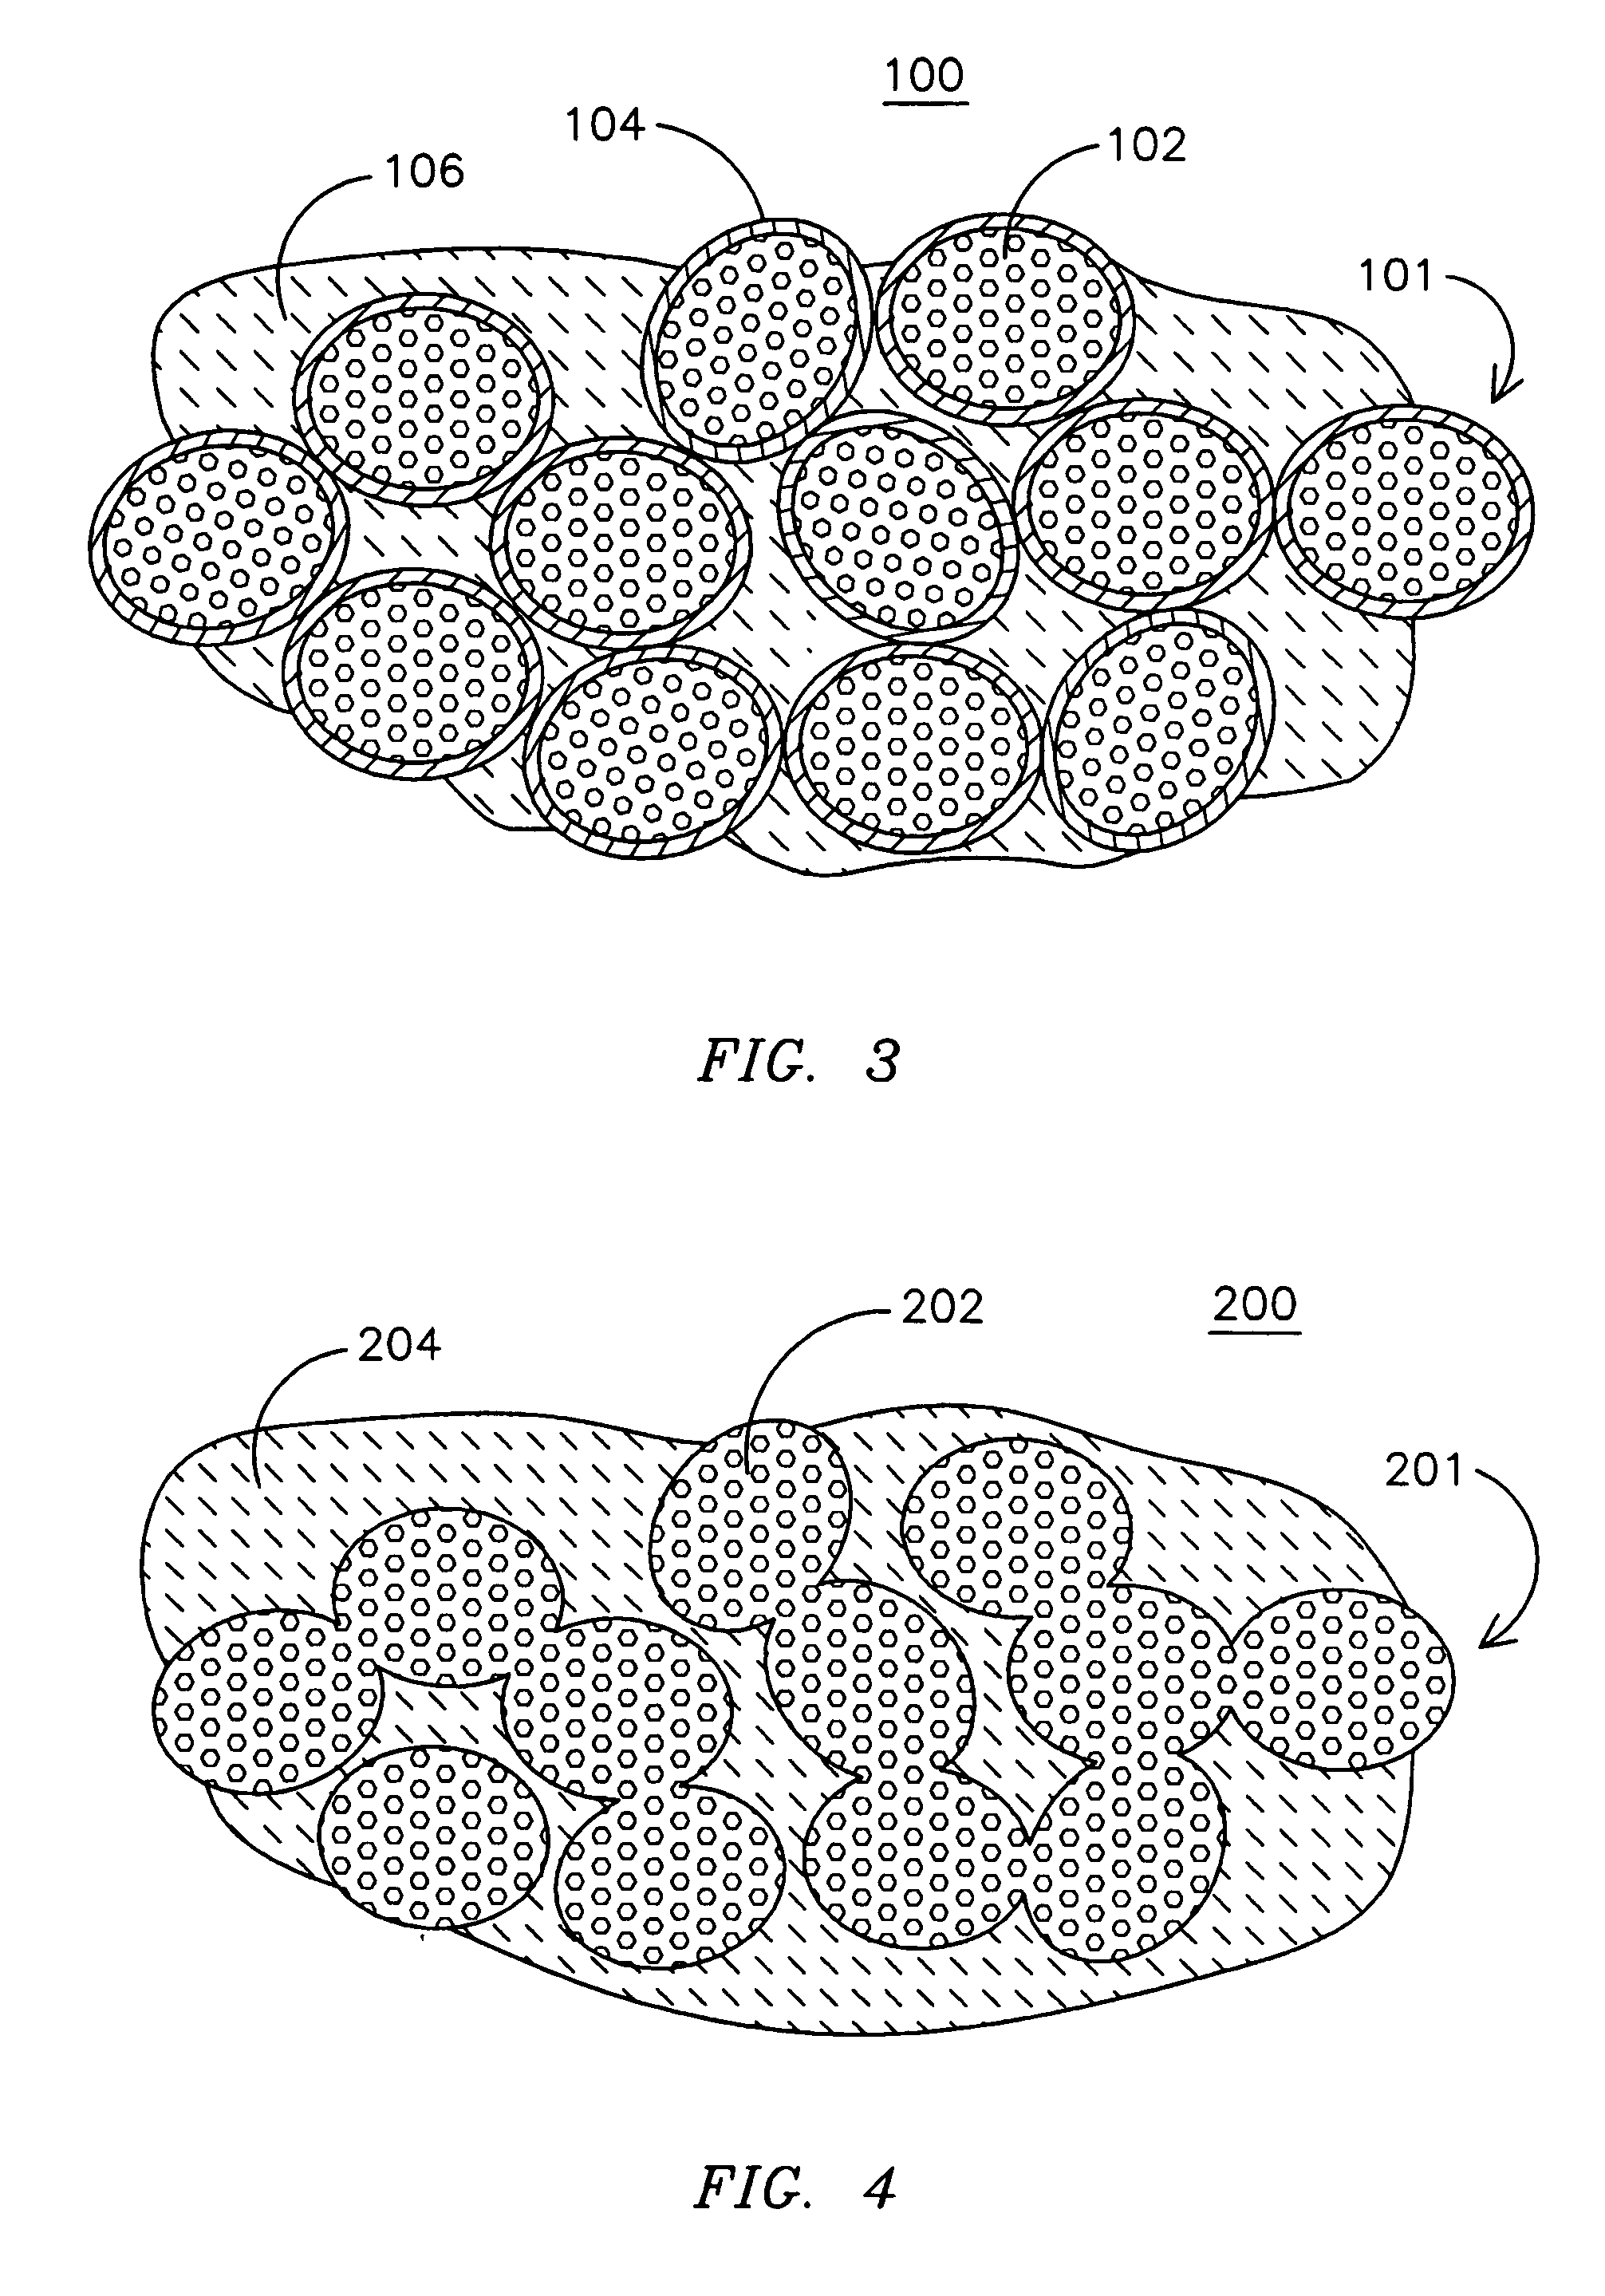 Insulating ceramic based on partially filled shapes